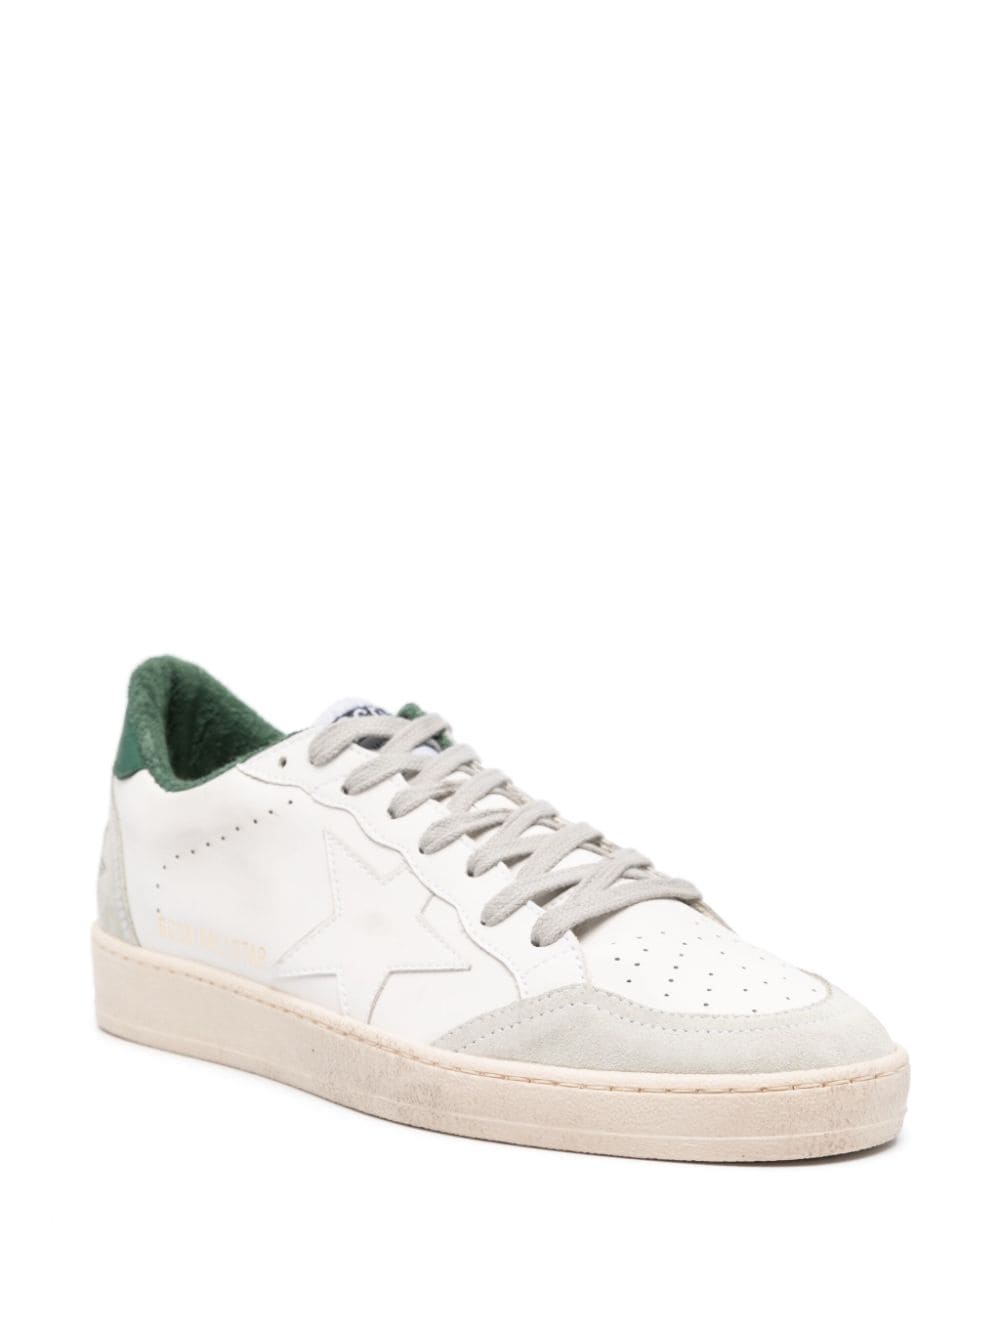 Golden Goose Ball Star Leather Sneakers - Farfetch